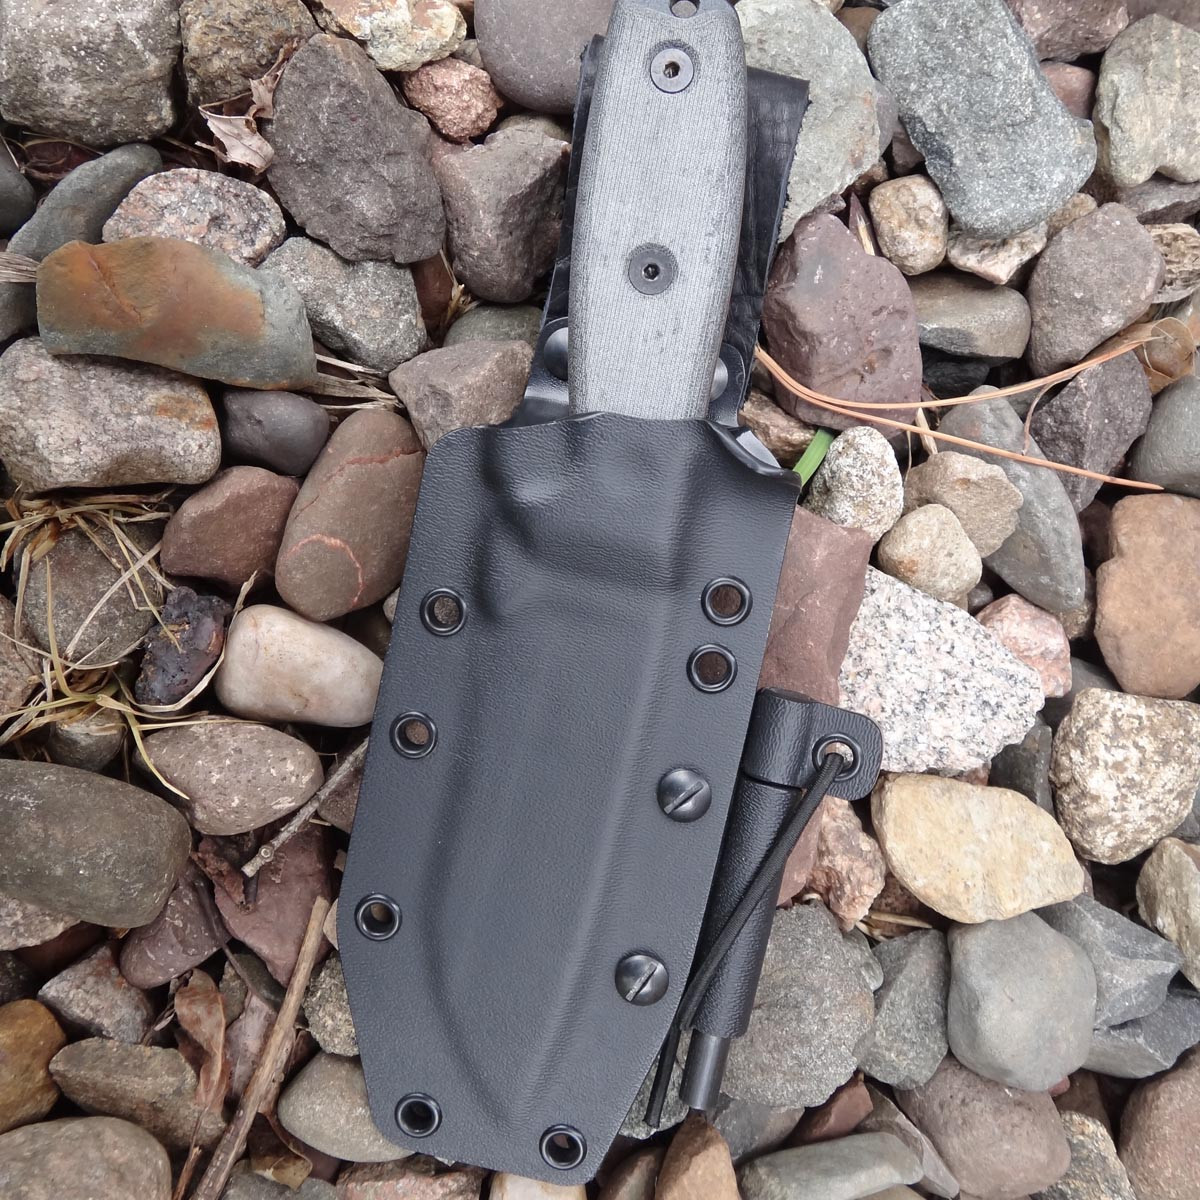 Custom Kydex sheath for the ESEE-4 in MultiCam 